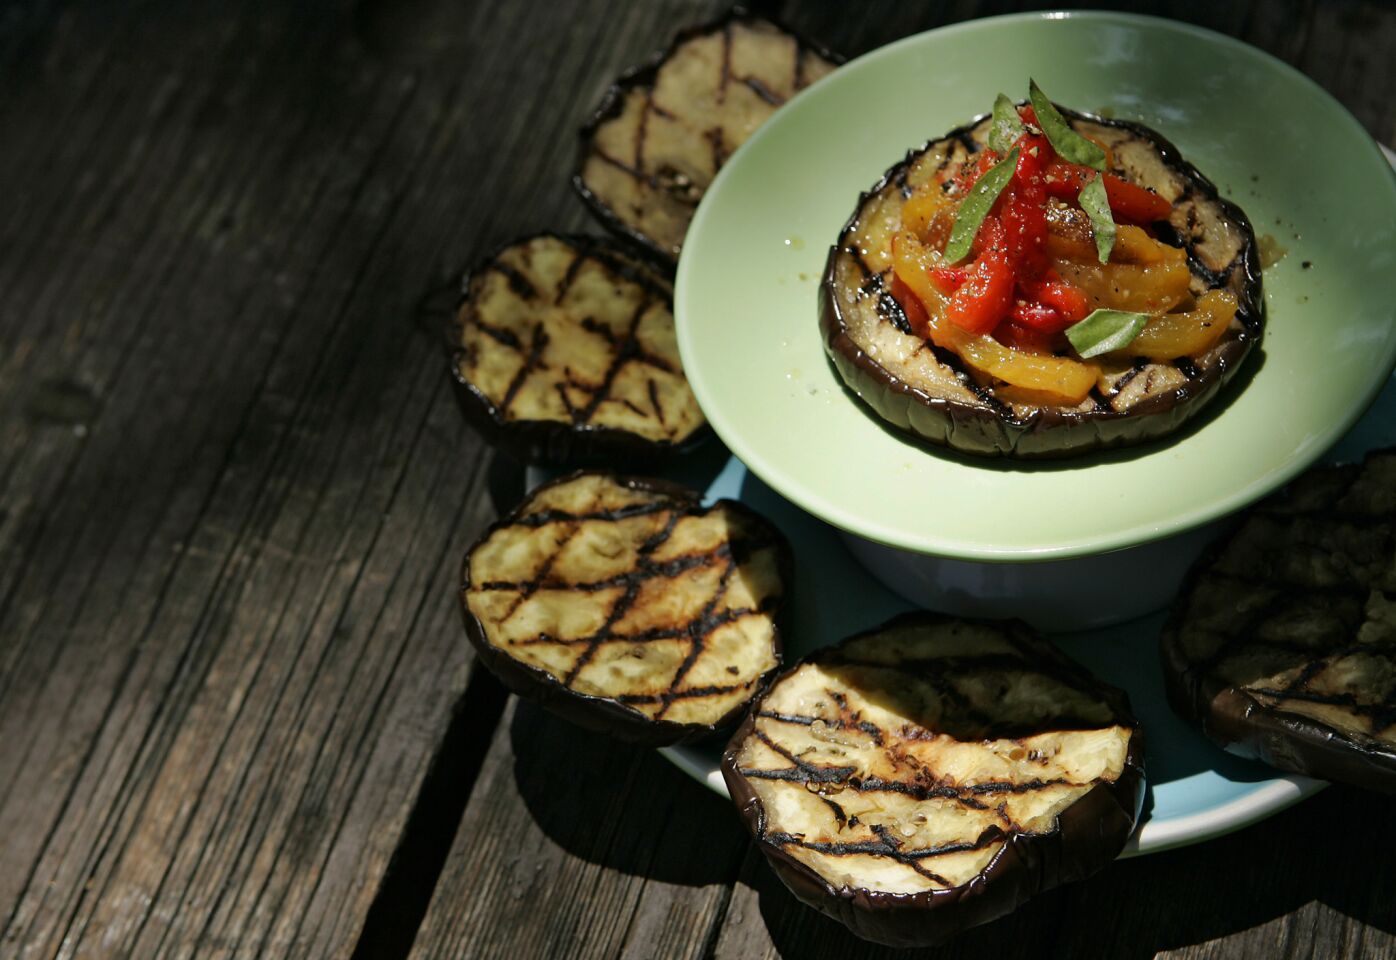 Grilled eggplant with red and yellow peppers